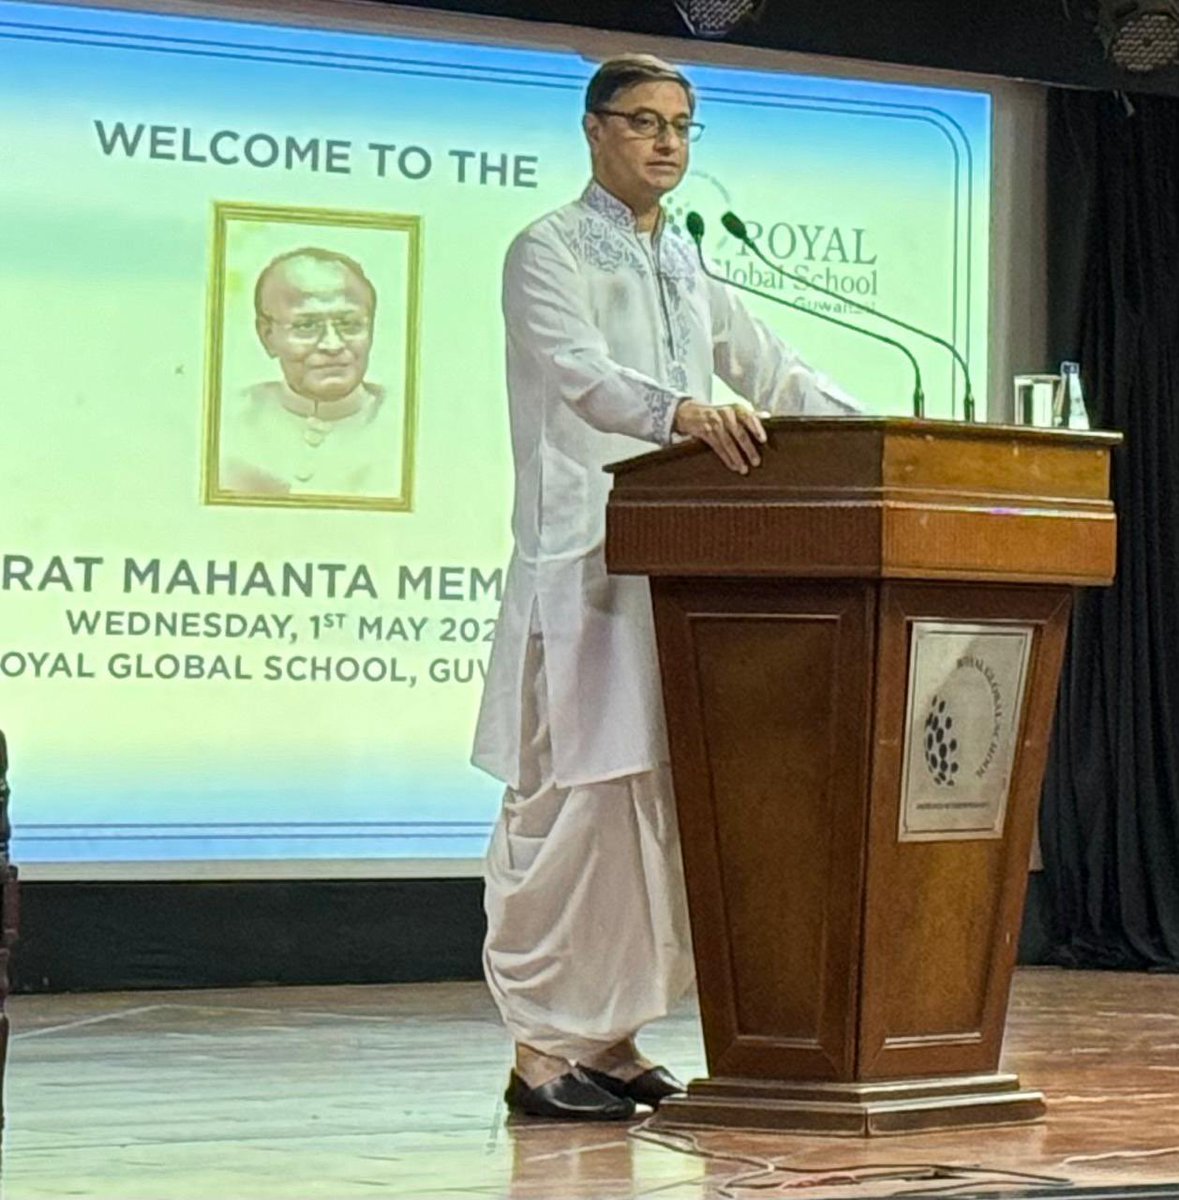 Impressed by the very valuable researched speech of @sanjeevsanyal at the Sarat Mahanta Memorial Lecture. There are some controversy in some contexts, but there is no doubt about his reachers. Thanks to Sarat Mahanta Foundation.